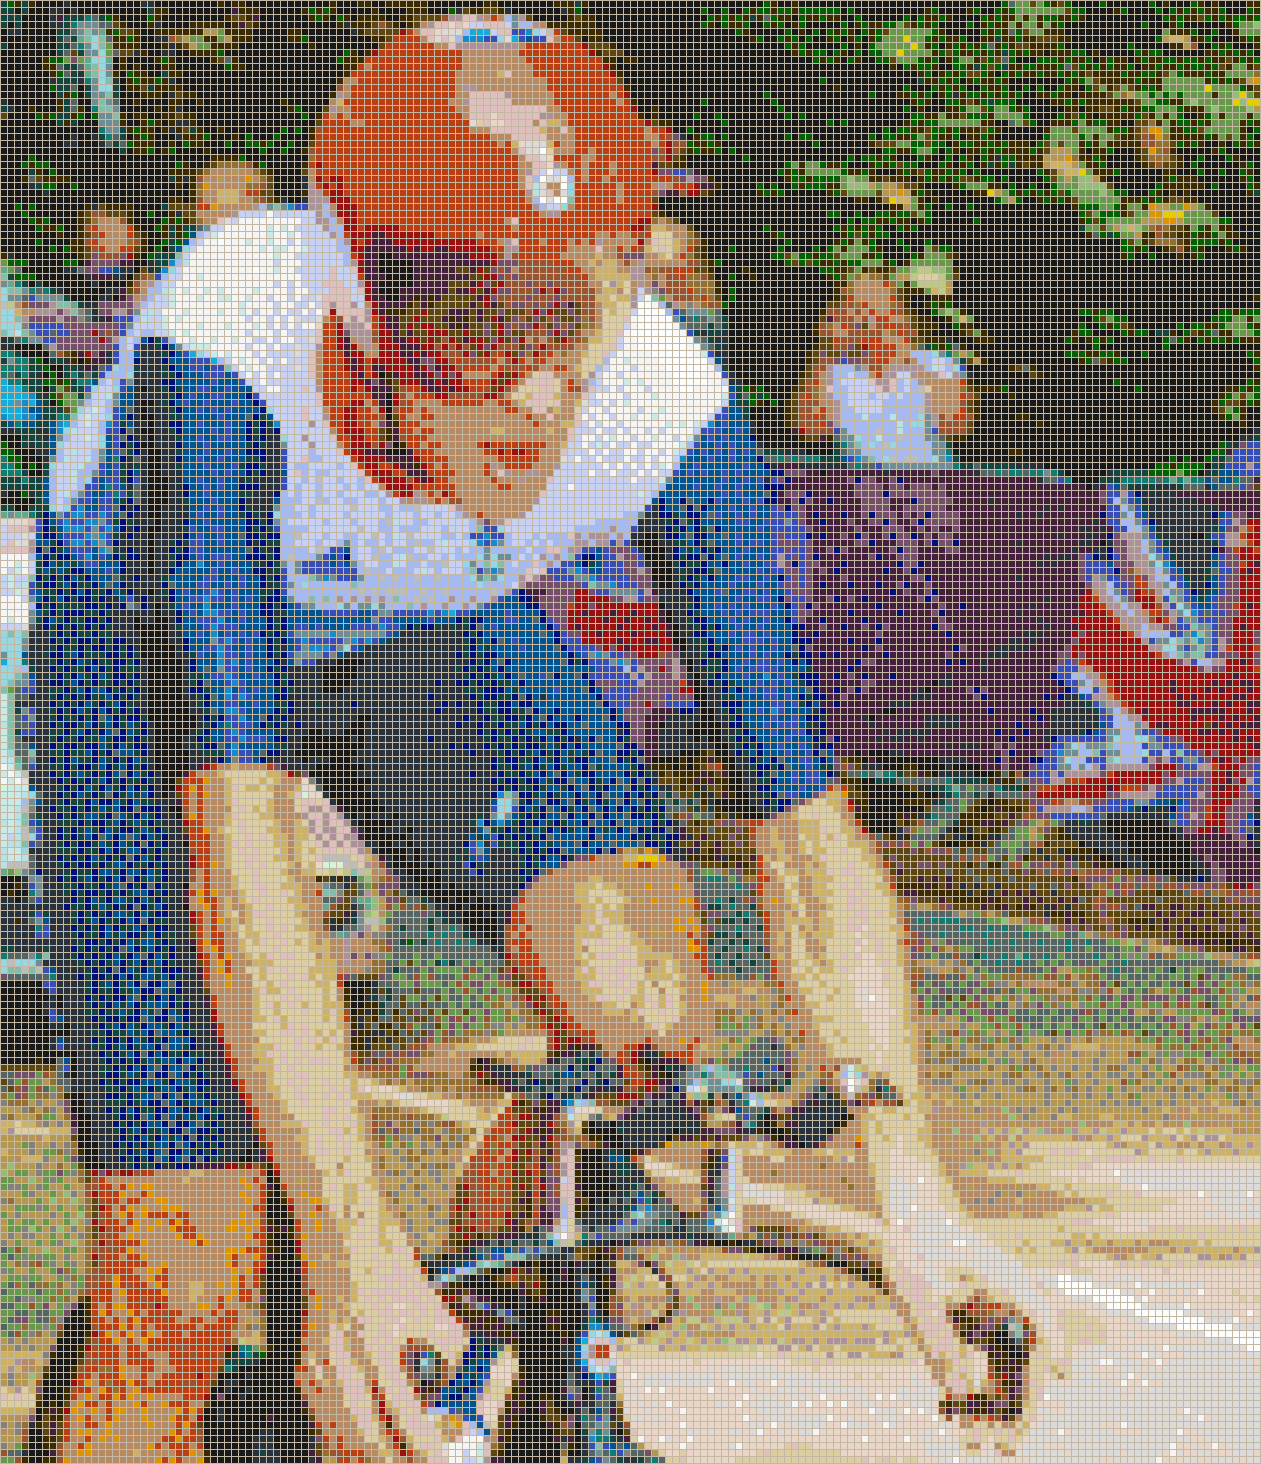 Bradley Wiggins riding to Olympic Gold 2012 - Mosaic Tile Picture Art